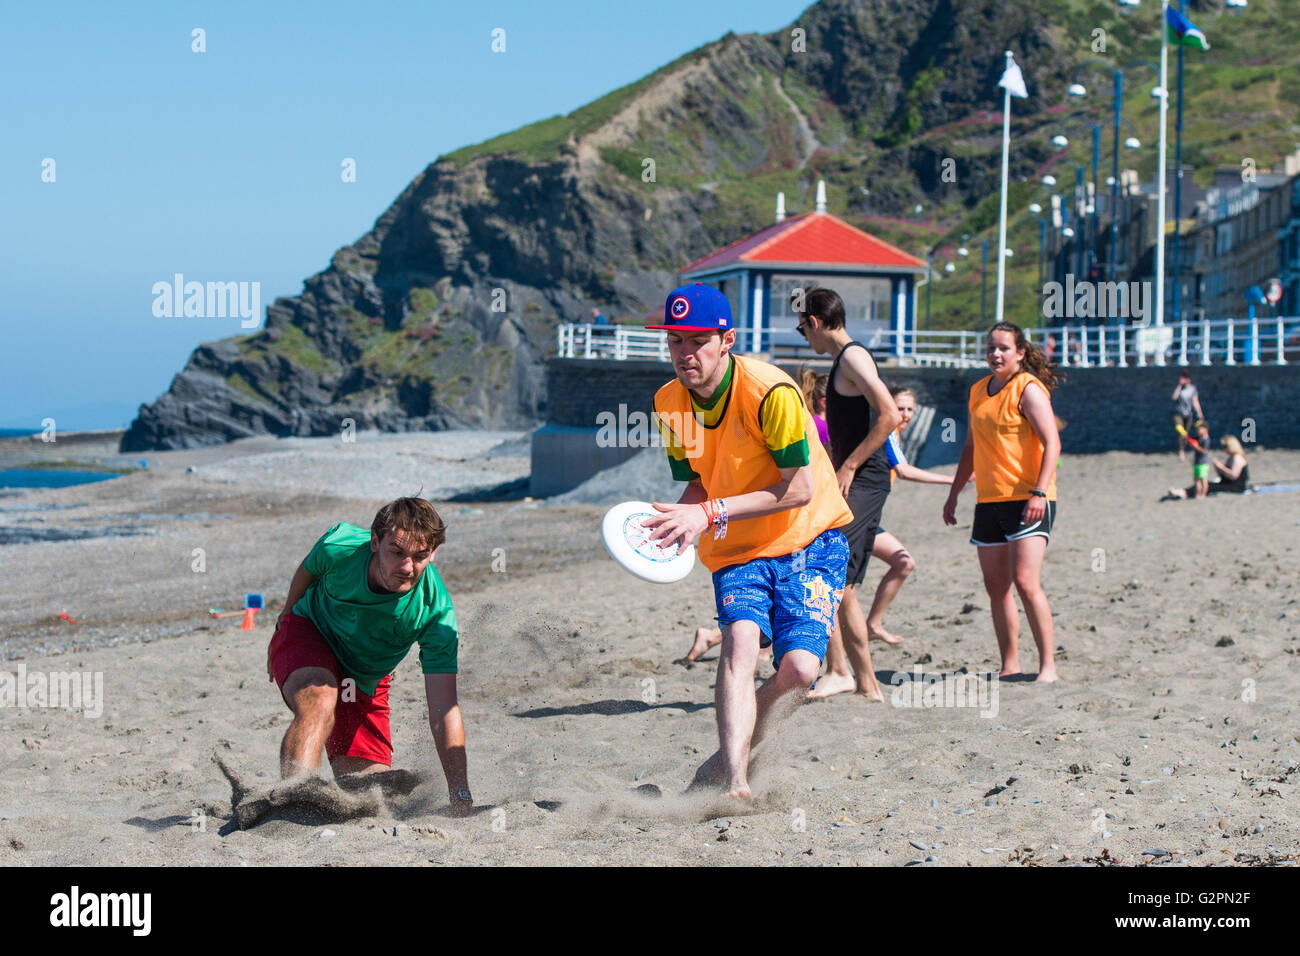 Aberystwyth Wales UK, Thursday 02 June 2016  UK weather: On the second ‘official’ day of summer students from Aberystwyth University 'Ultimate Frisbee' club  enjoy a morning of clear blue skies and warm sunny weather on the beach  on the Cardigan Bay coast of West Wales.   In contrast to the overcast and damp conditions in the east of the country, the temperature in Wales and the west country is expected to reach the low 20’s  centigrade.  photo Credit:  Keith Morris / Alamy Live News Stock Photo